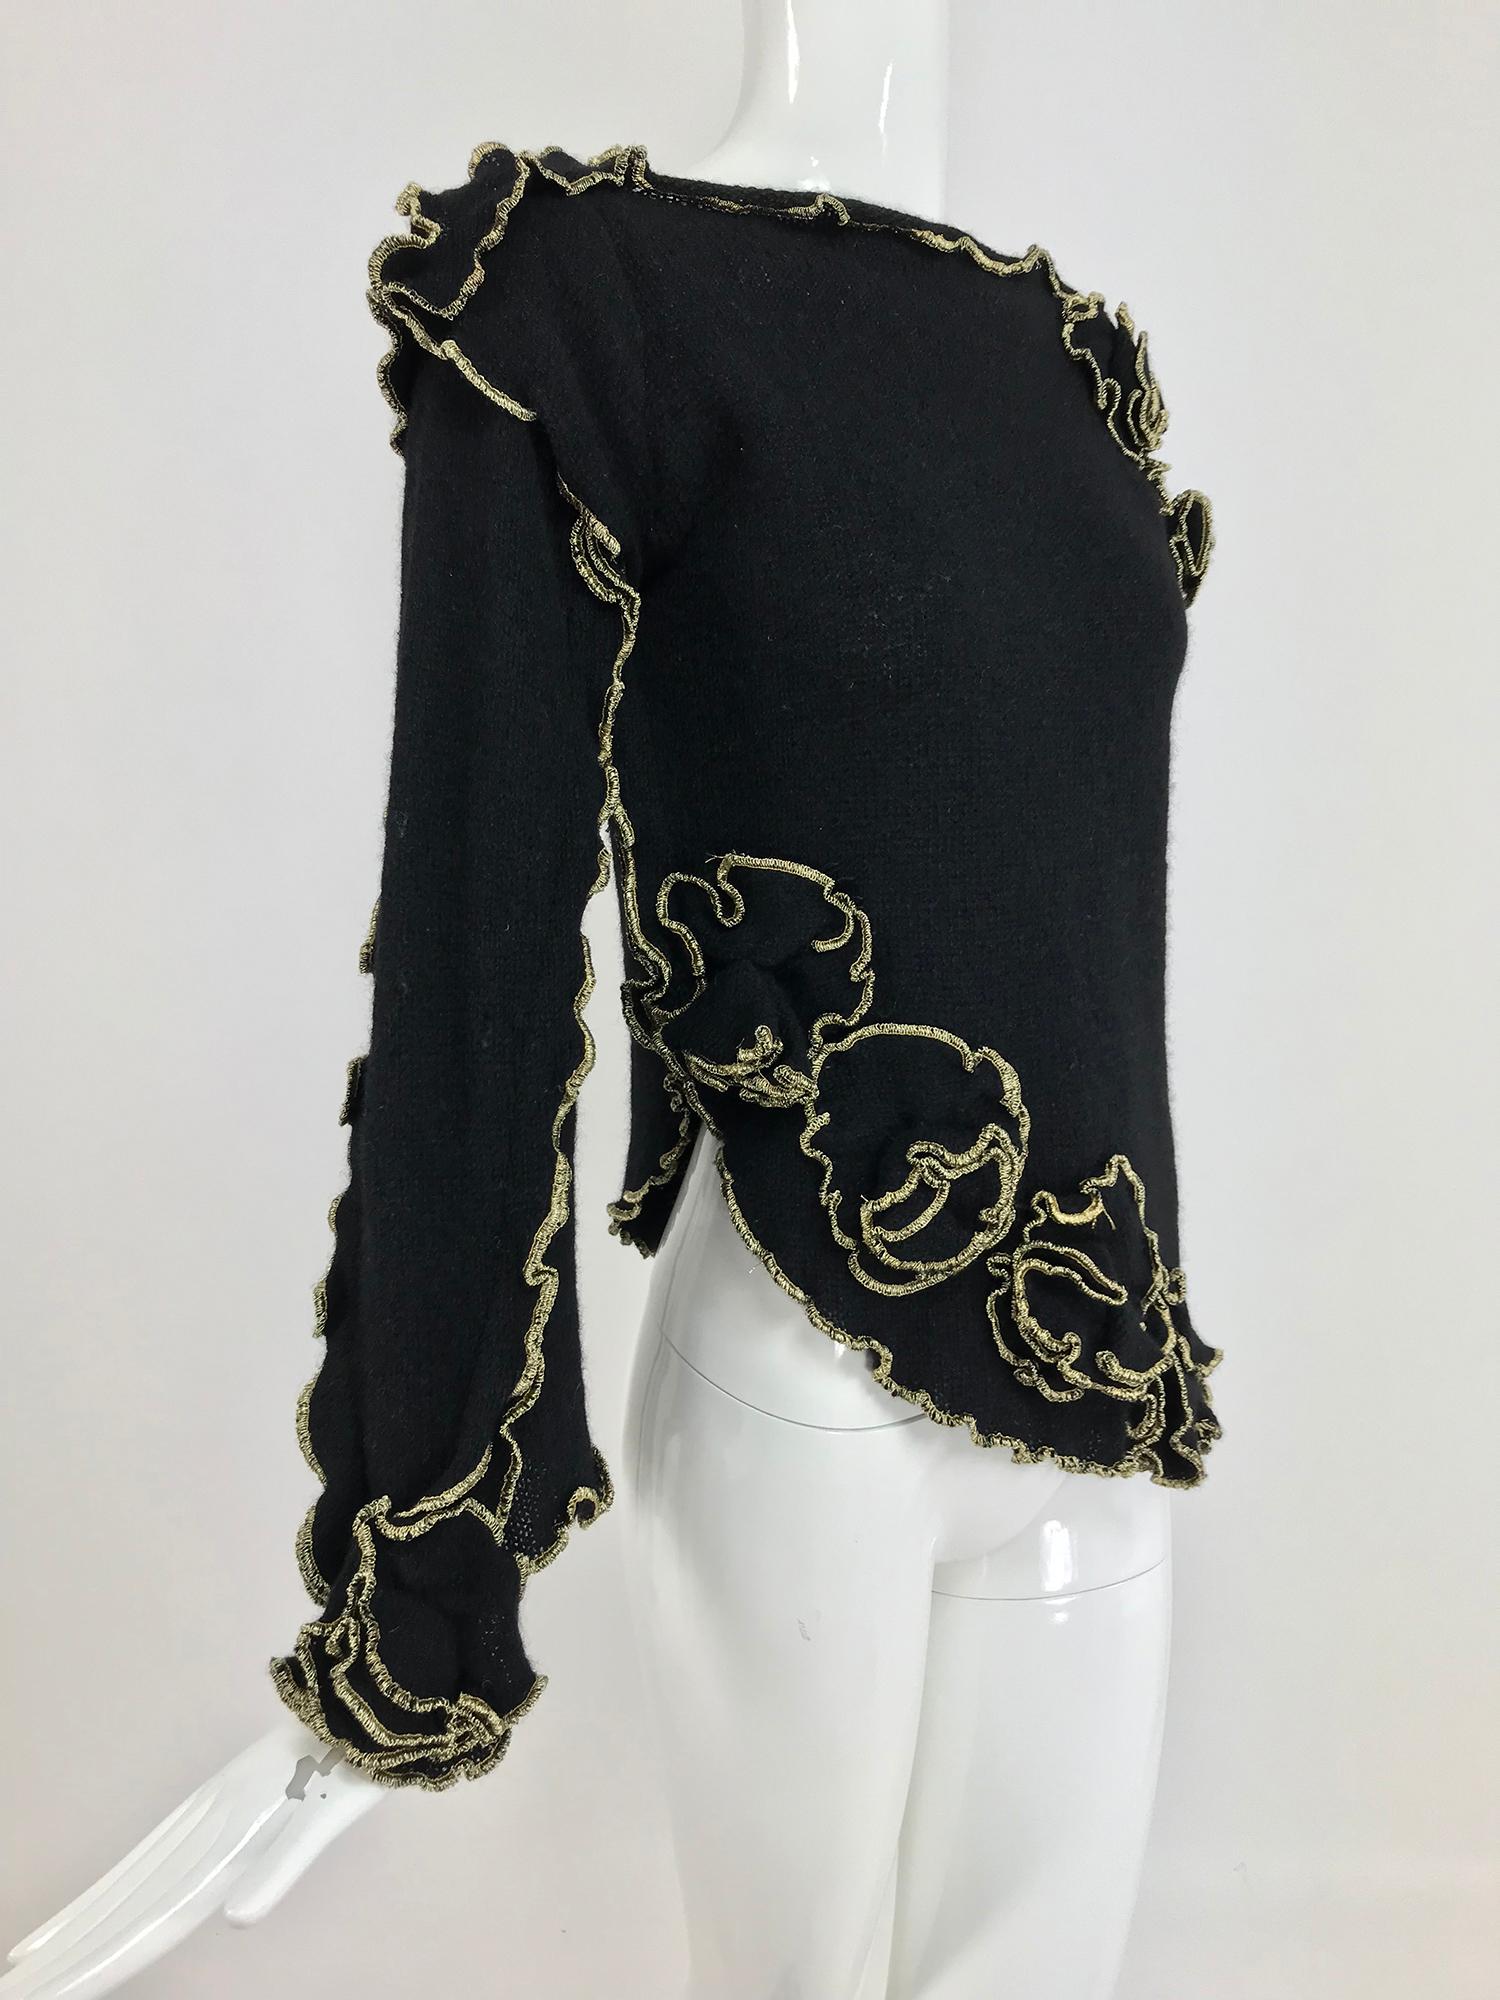 Leigh Westbrook Black Knit Gold Trim Floral Applique Sweater 1980s 13